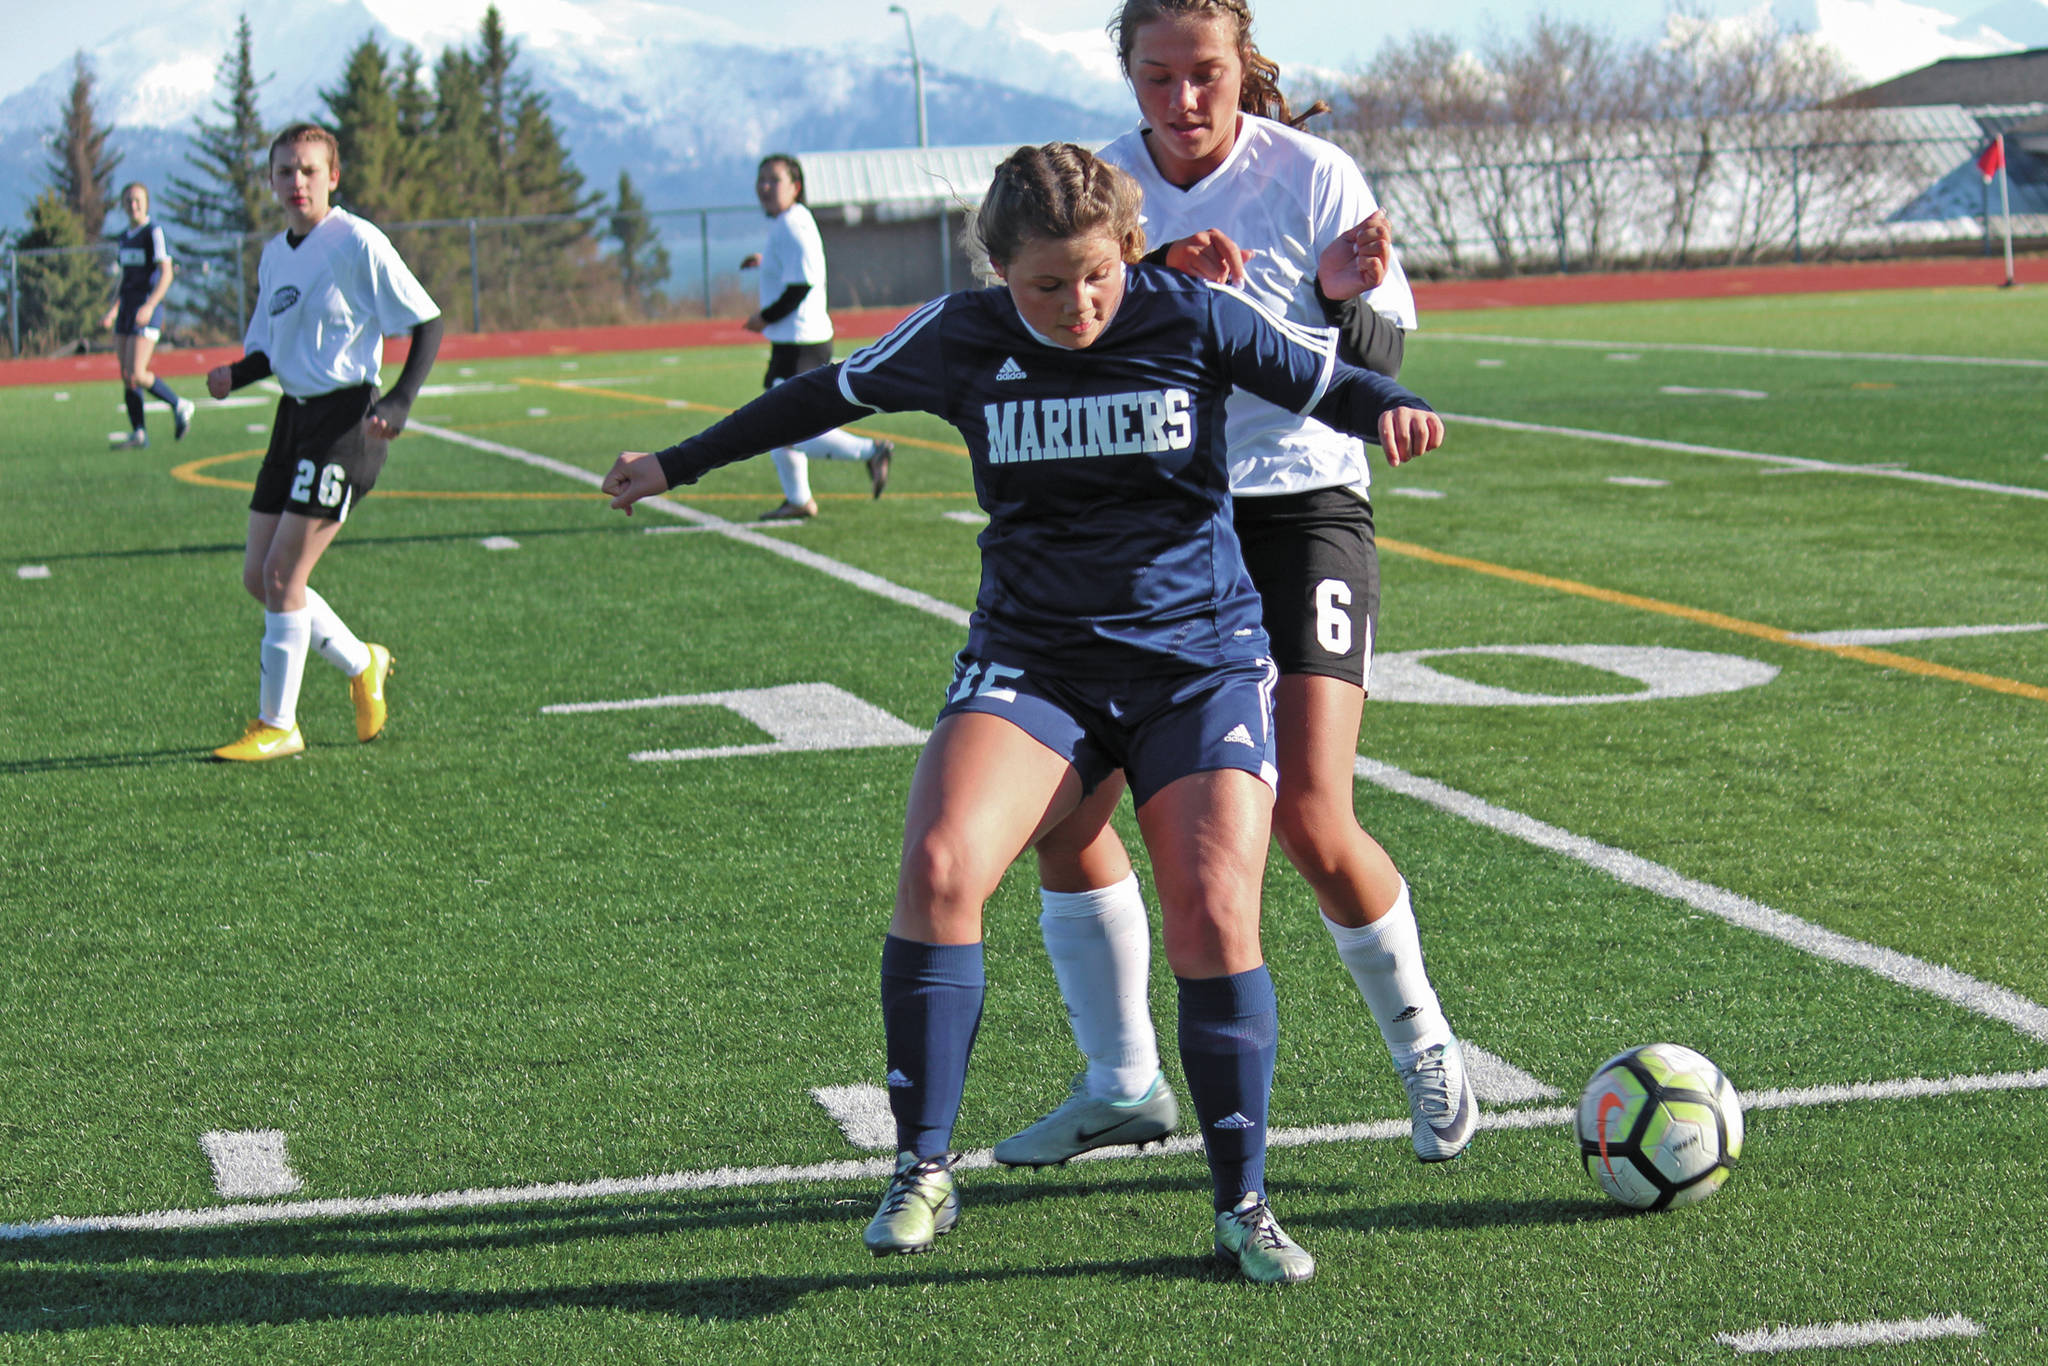 Homer’s Rylee Doughty gets in front of Nikiski’s Emma Wik while battling for the ball during an April 23, 2019 game at Homer High School in Homer, Alaska. (Photo by Megan Pacer/Homer News)